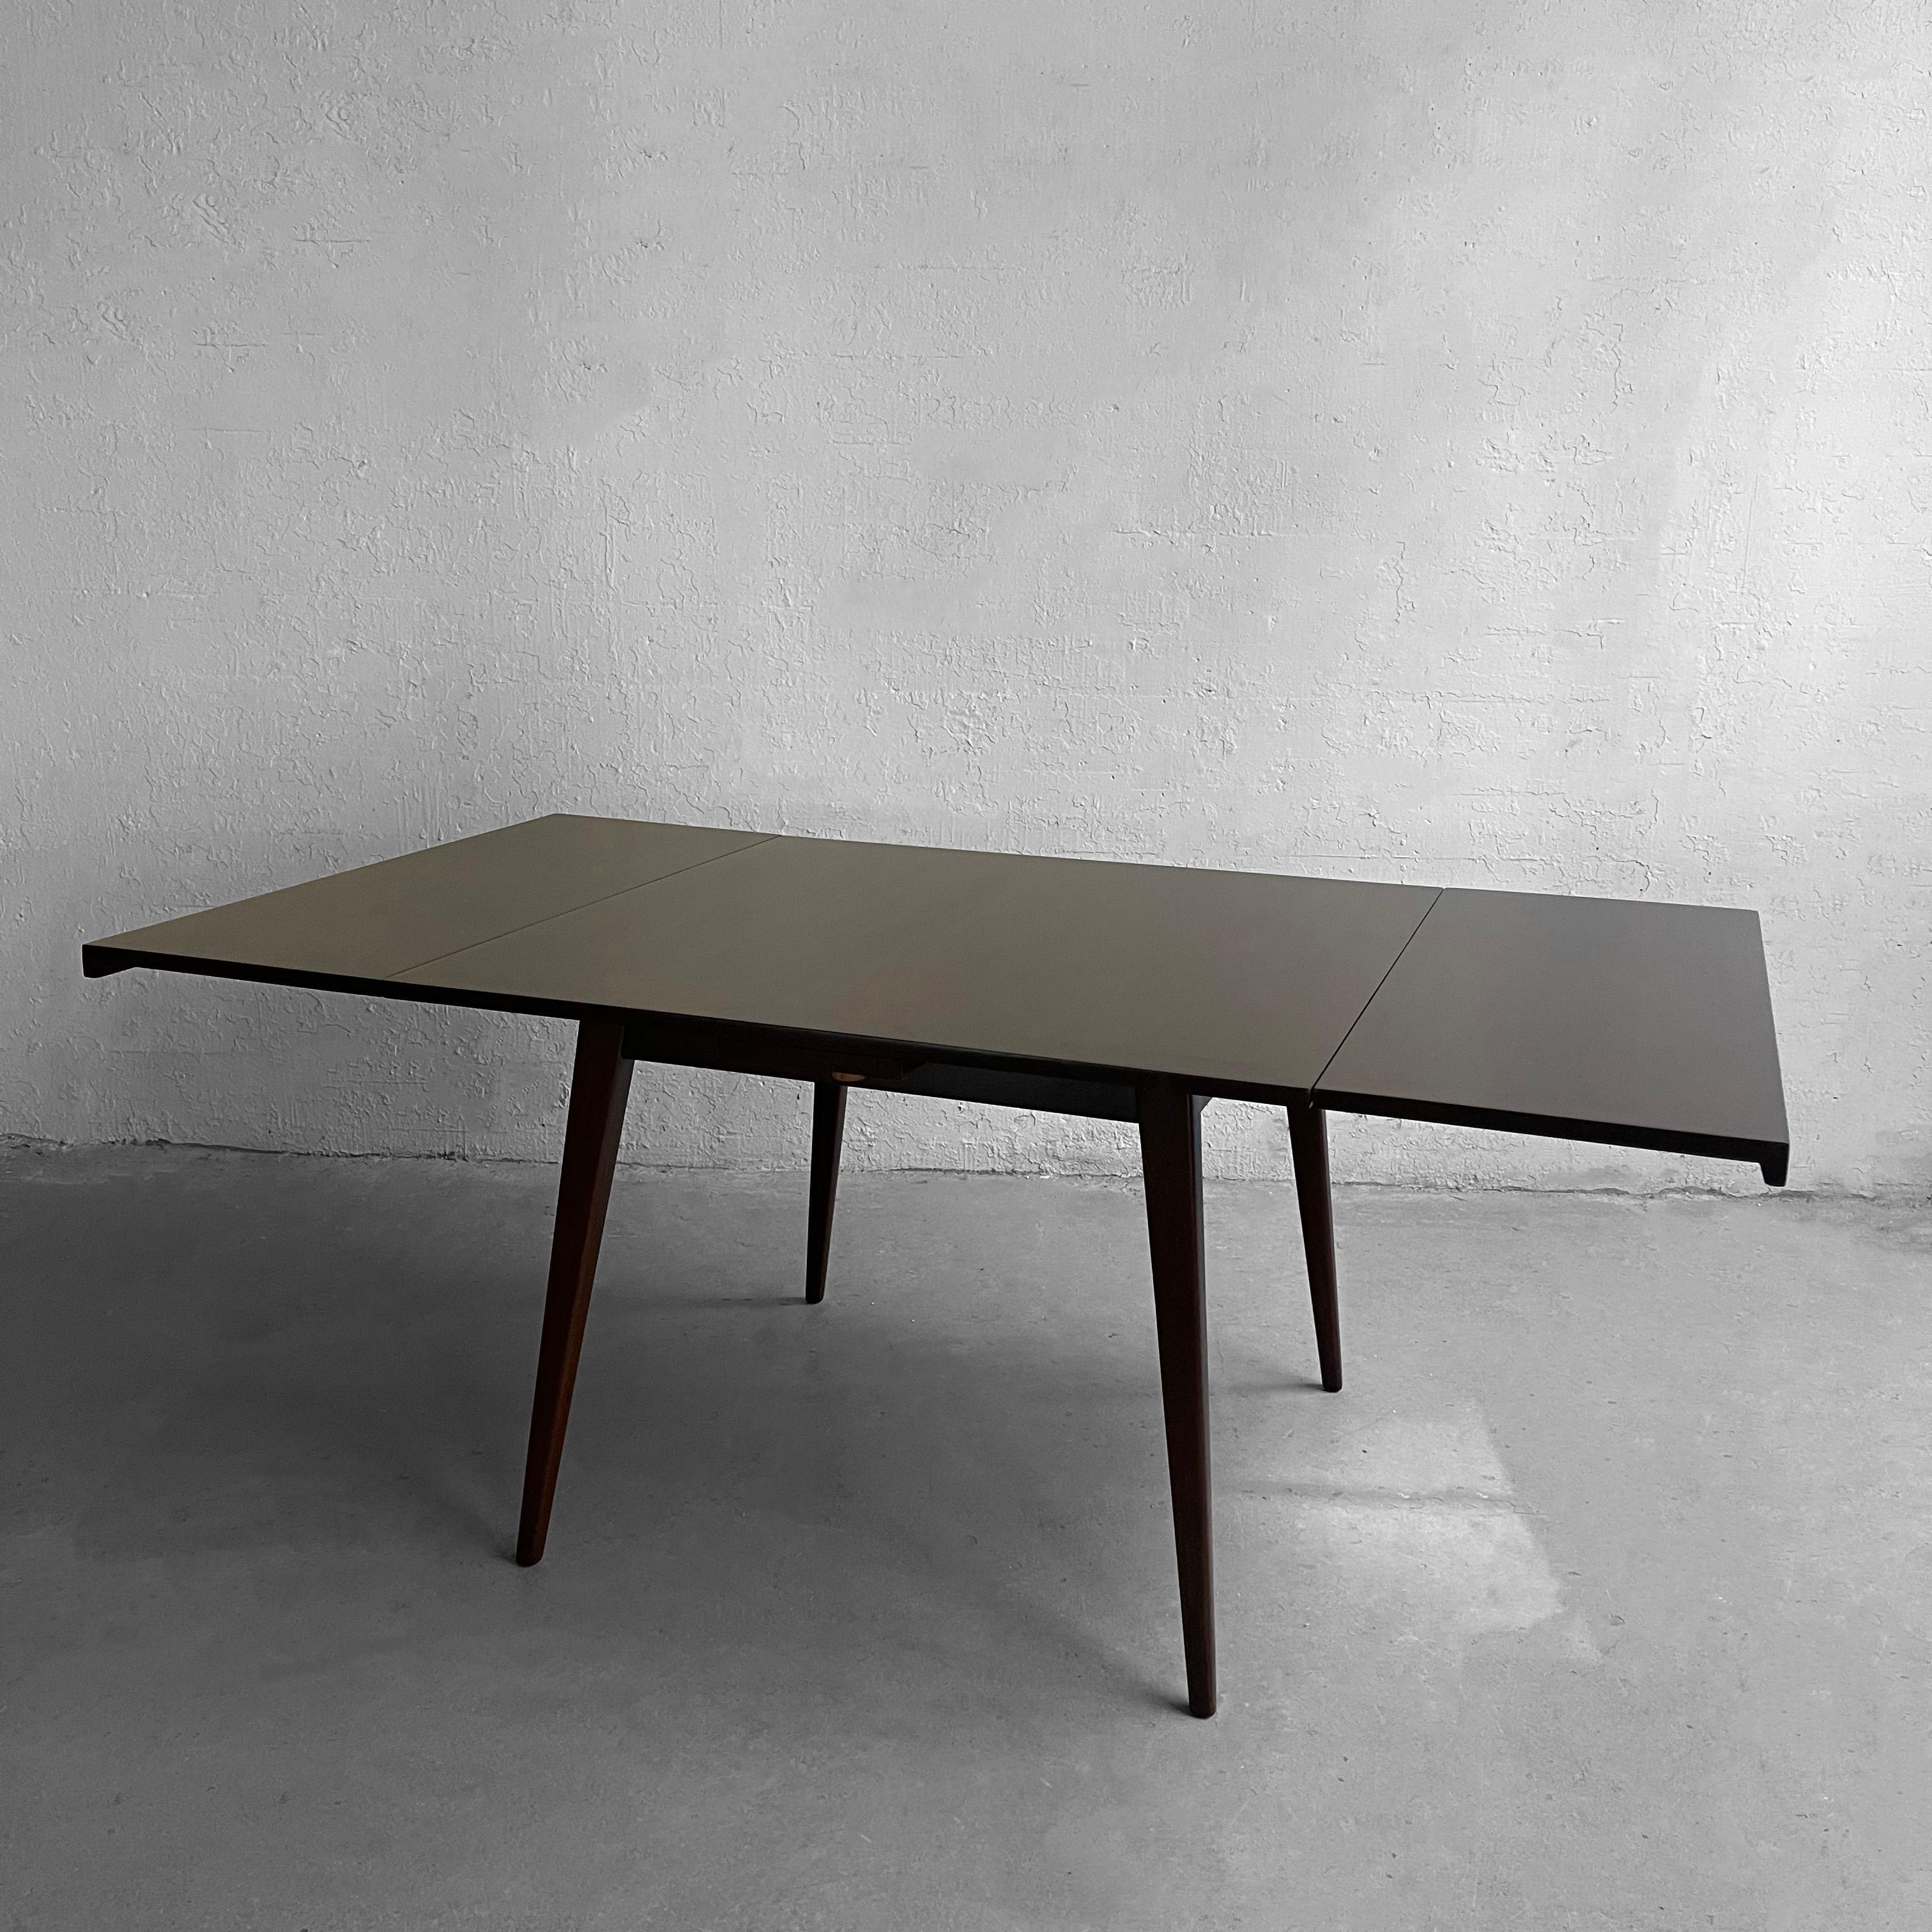 Mid-century modern, walnut, draw-leaf, extension dining table by Jens Risom features two 16 inch leaves that extend the table to 72 inches wide. The leaves tuck underneath the table and can easily be pulled out to extend.